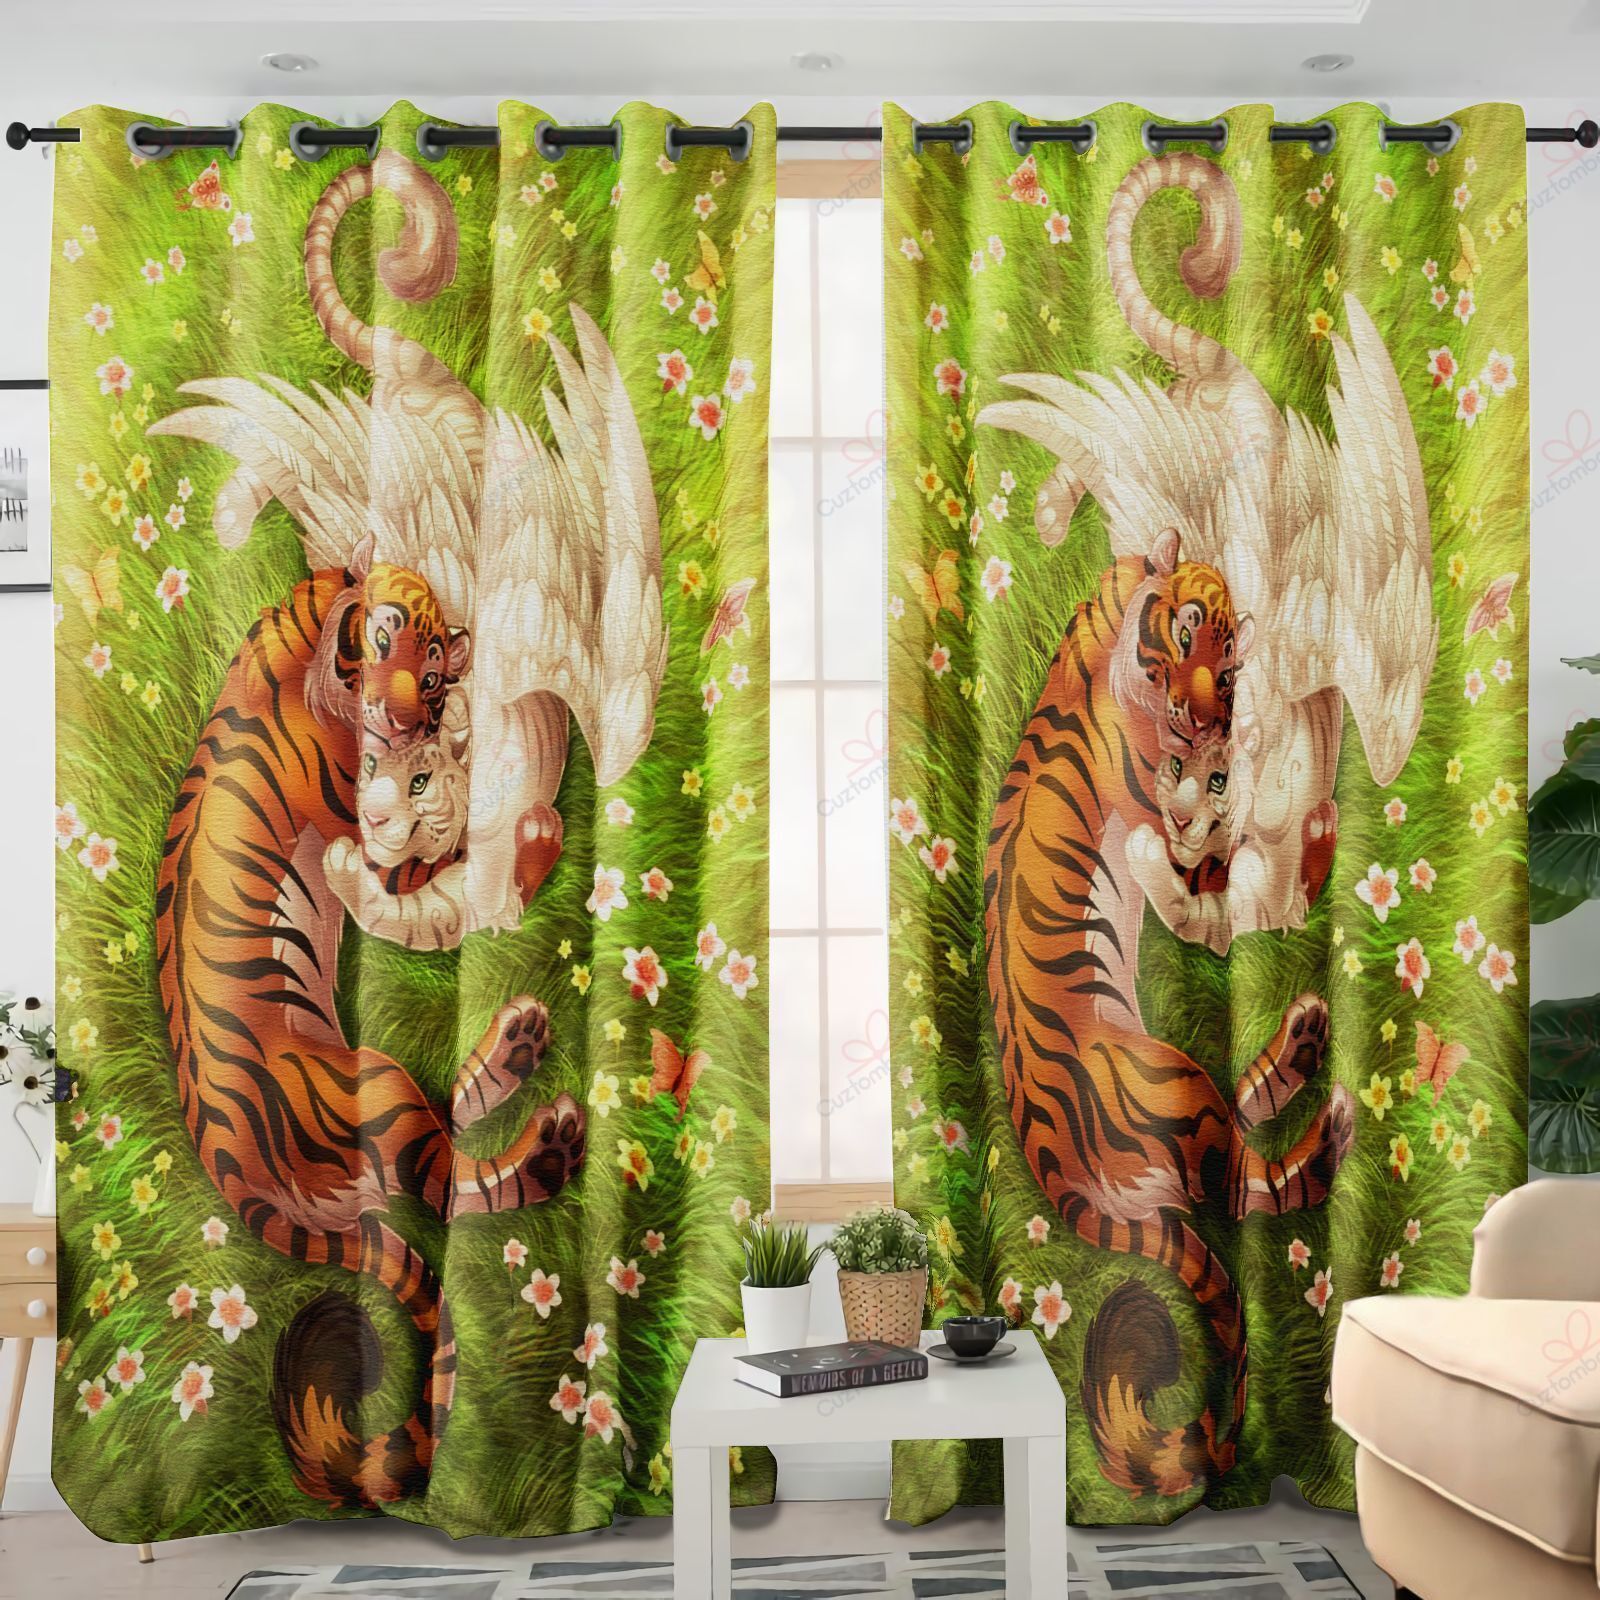 Tiger Embrace Grass Printed Window Curtain Home Decor